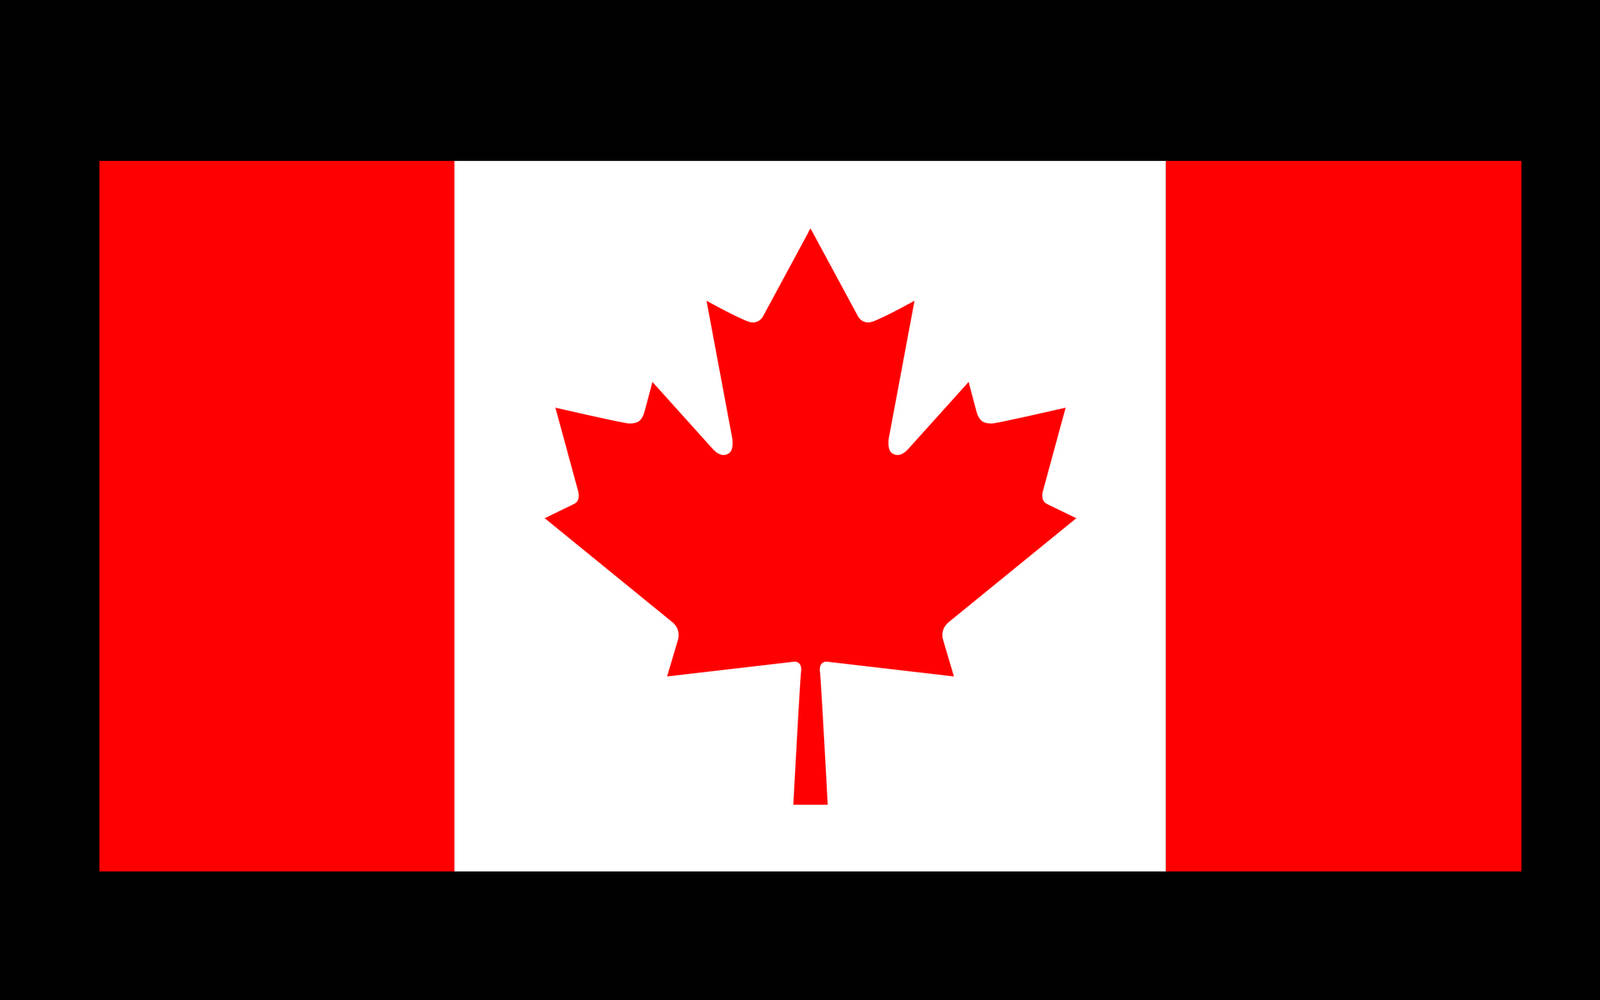 The Canadian Flag In Full Glory